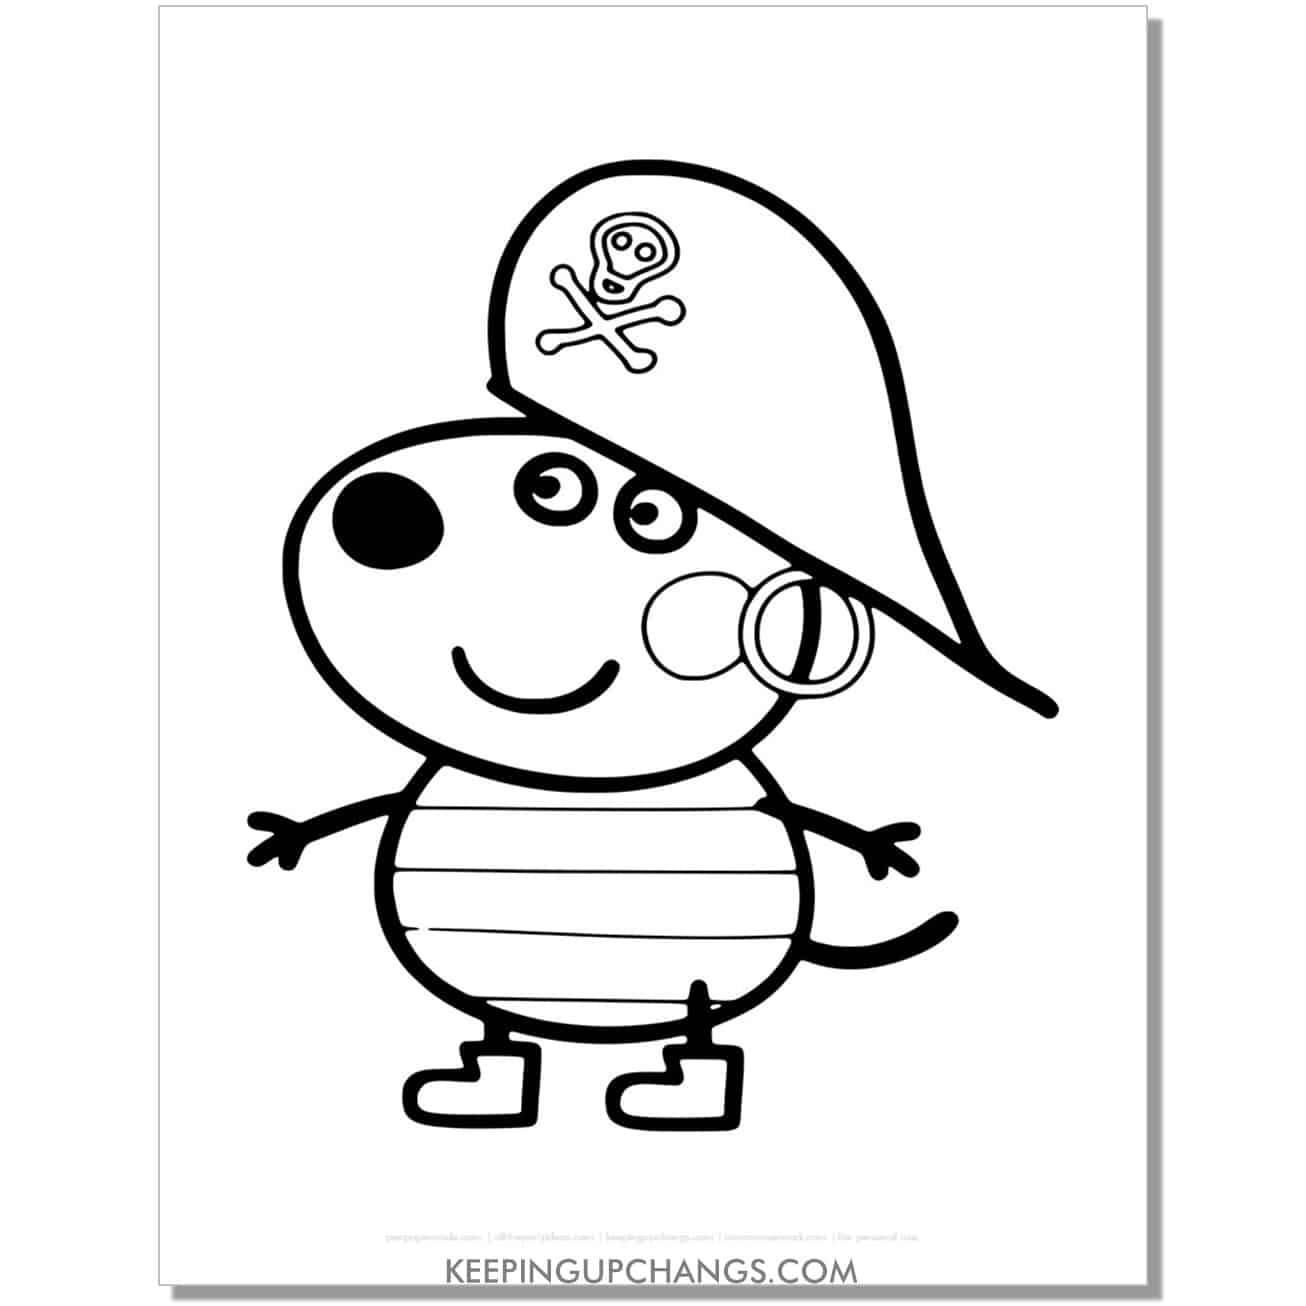 free danny dog in pirate costume peppa pig coloring page, sheet.